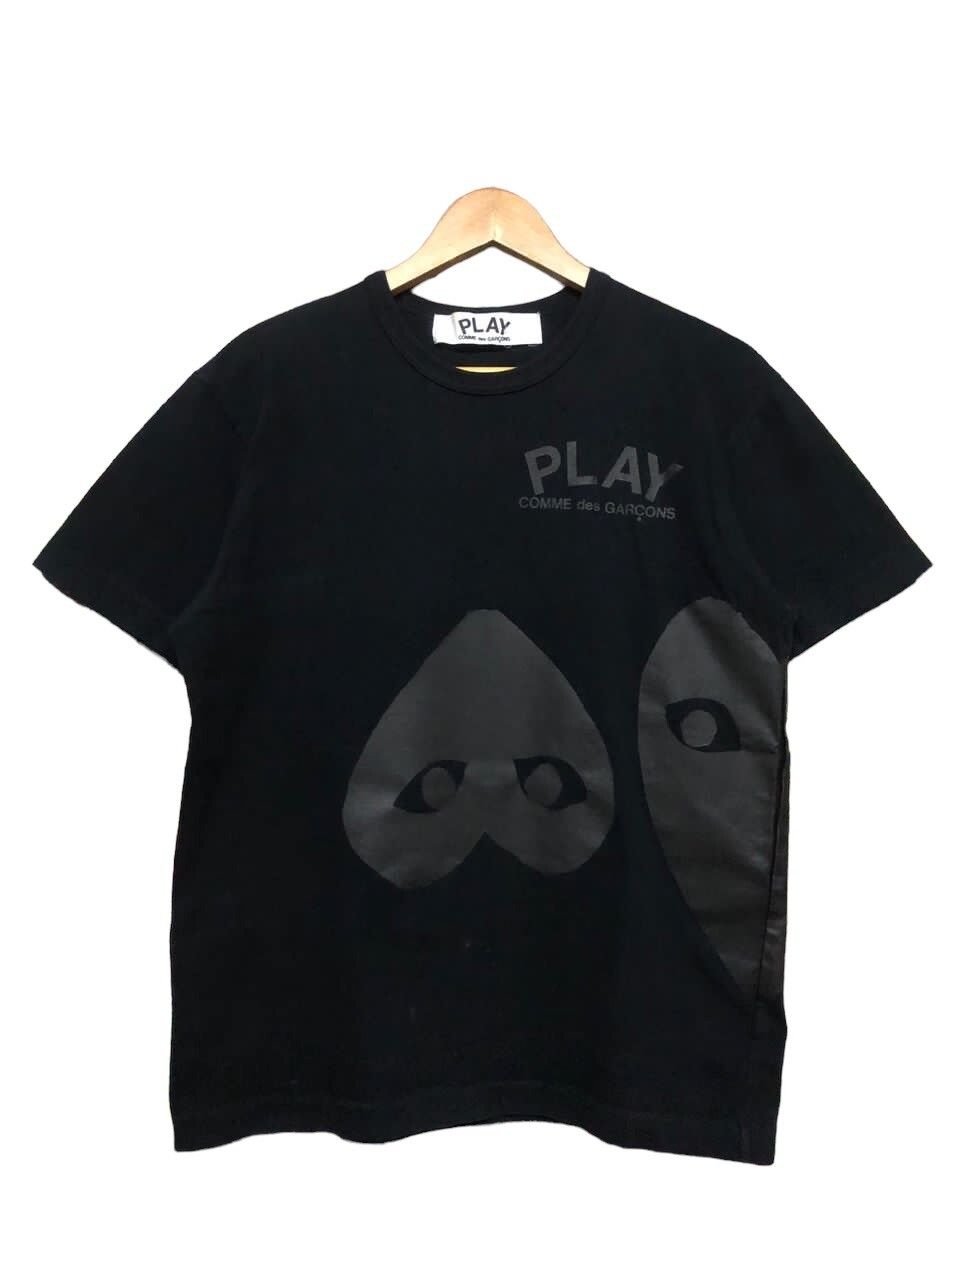 Commme Des Garcons Play Tee - 2